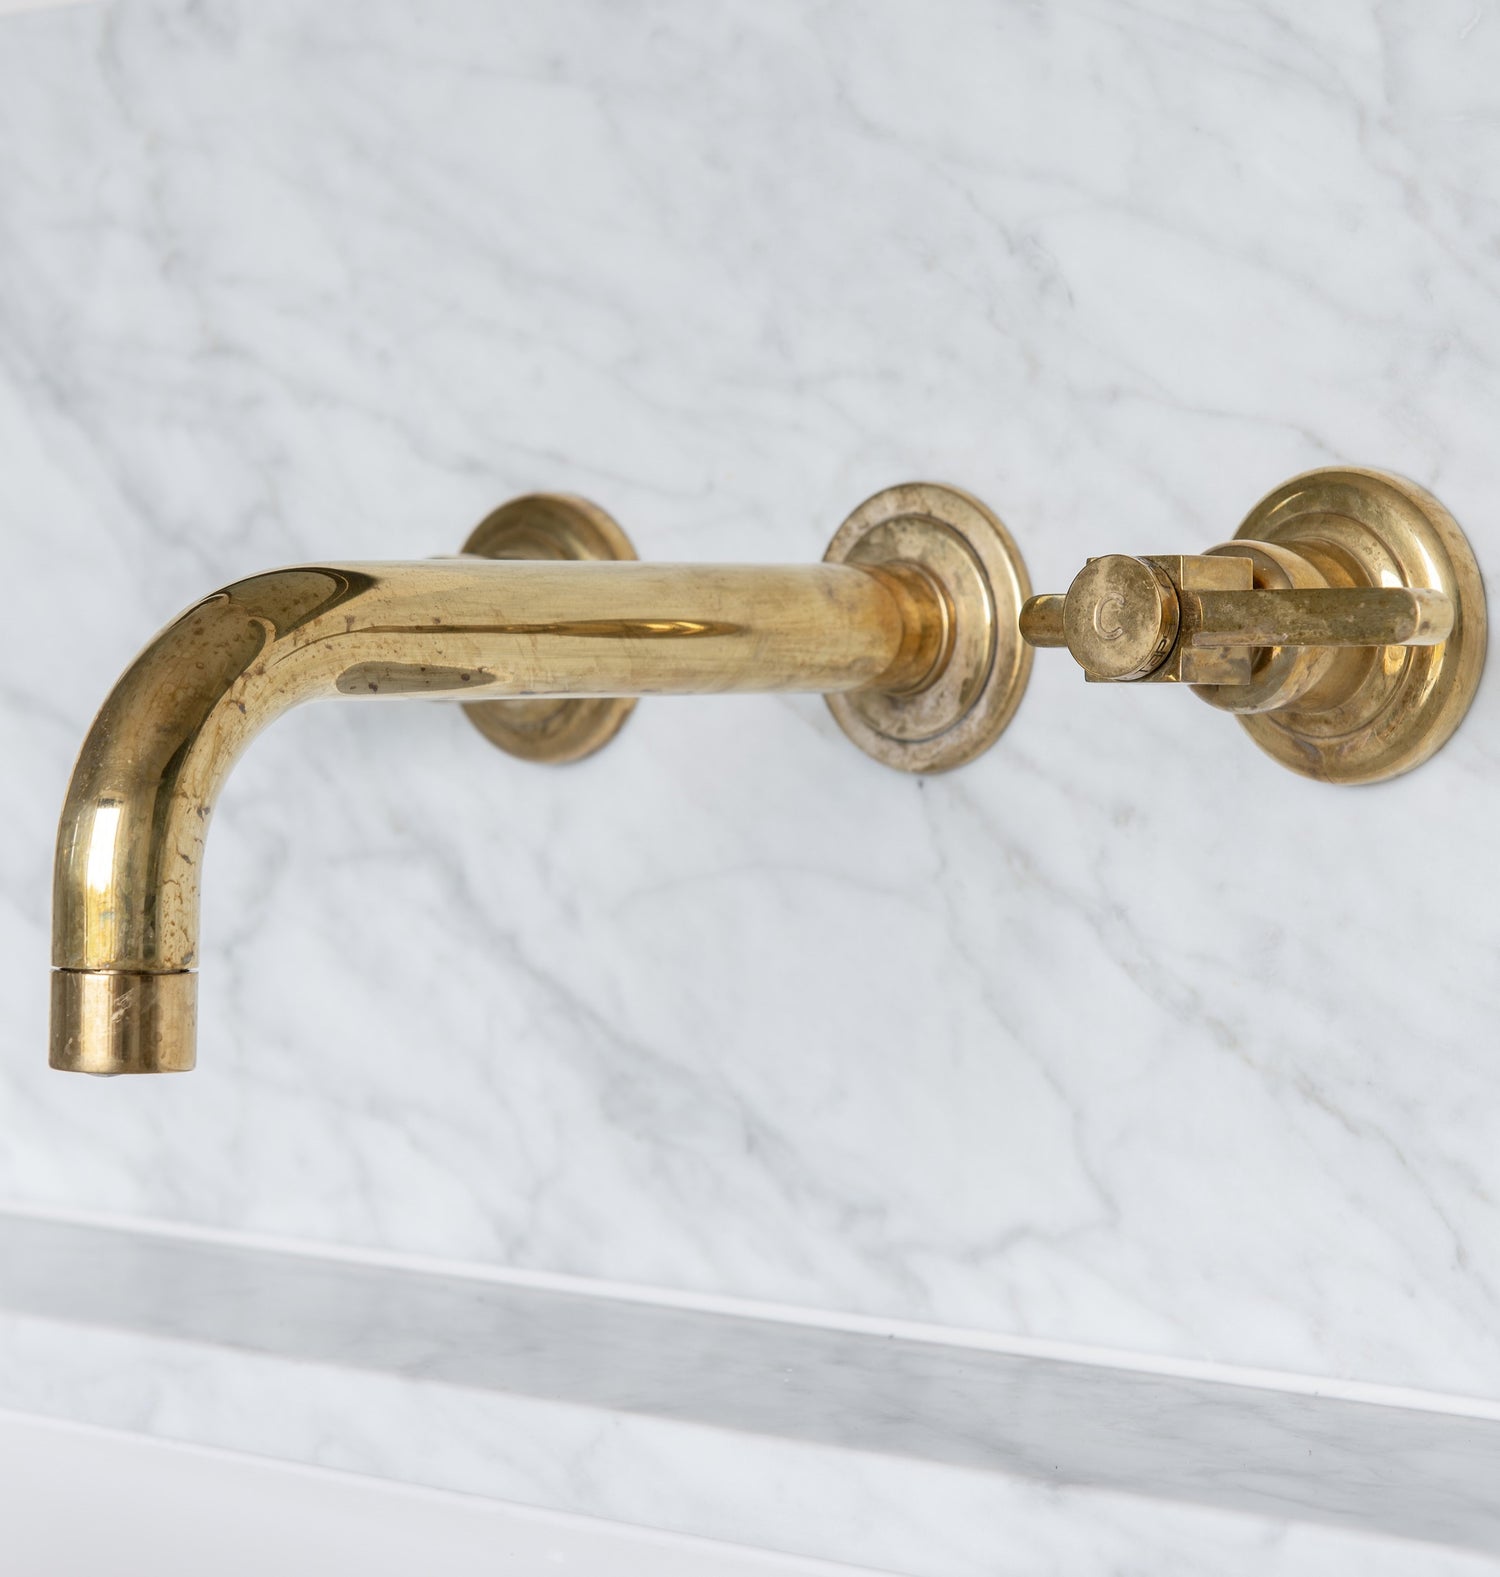 brass bathroom fittings and accessories, brass bathroom fittings and  accessories manufacturers, brass bathroom fittings, brass bathroom  accessories, brass bathroom fittings and accessories exporter, brass  bathroom fittings and accessories traders